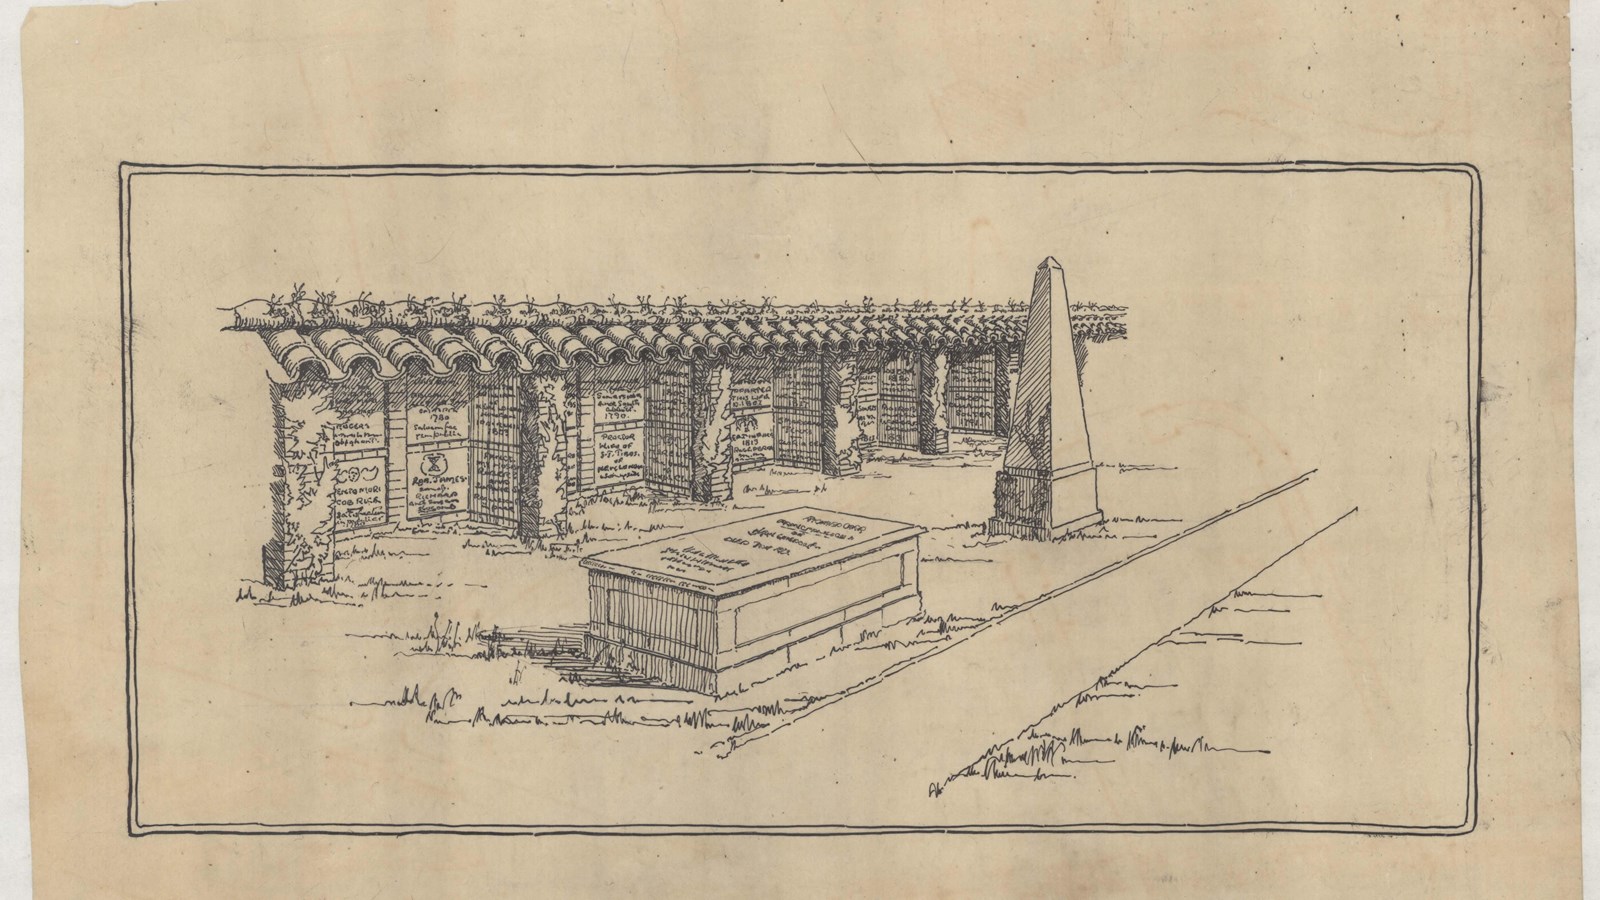 Pencil drawing of wall with writing on it, large casket like box in front with obelisk next to it